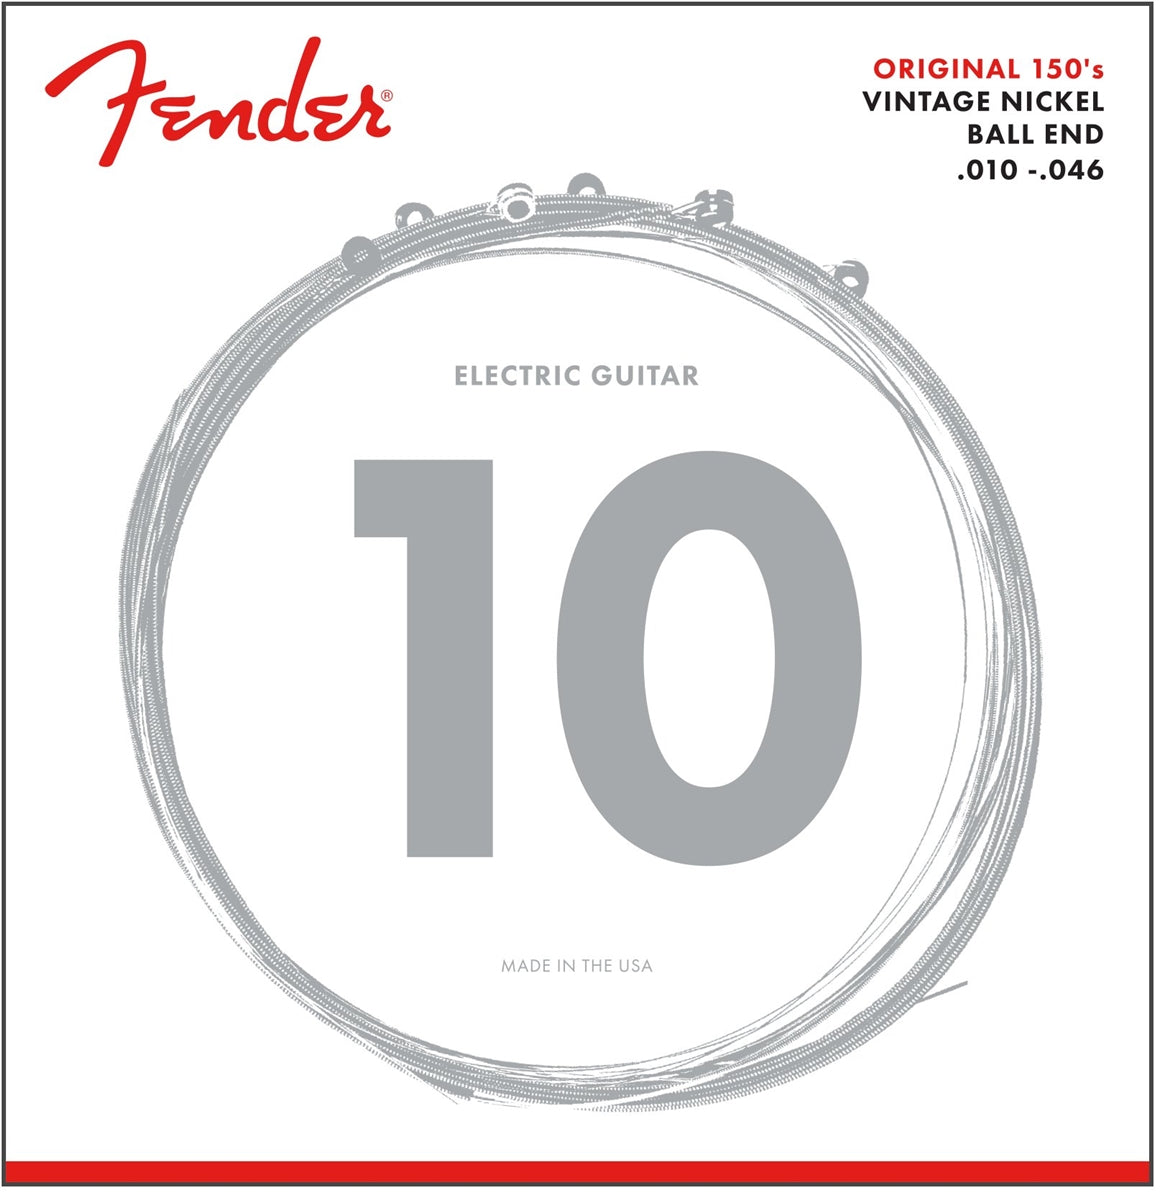 Fender Original Pure Vintage Nickel Acoustic Electric Guitar String Set with Ball Ends for Musicians (150R, 150L)